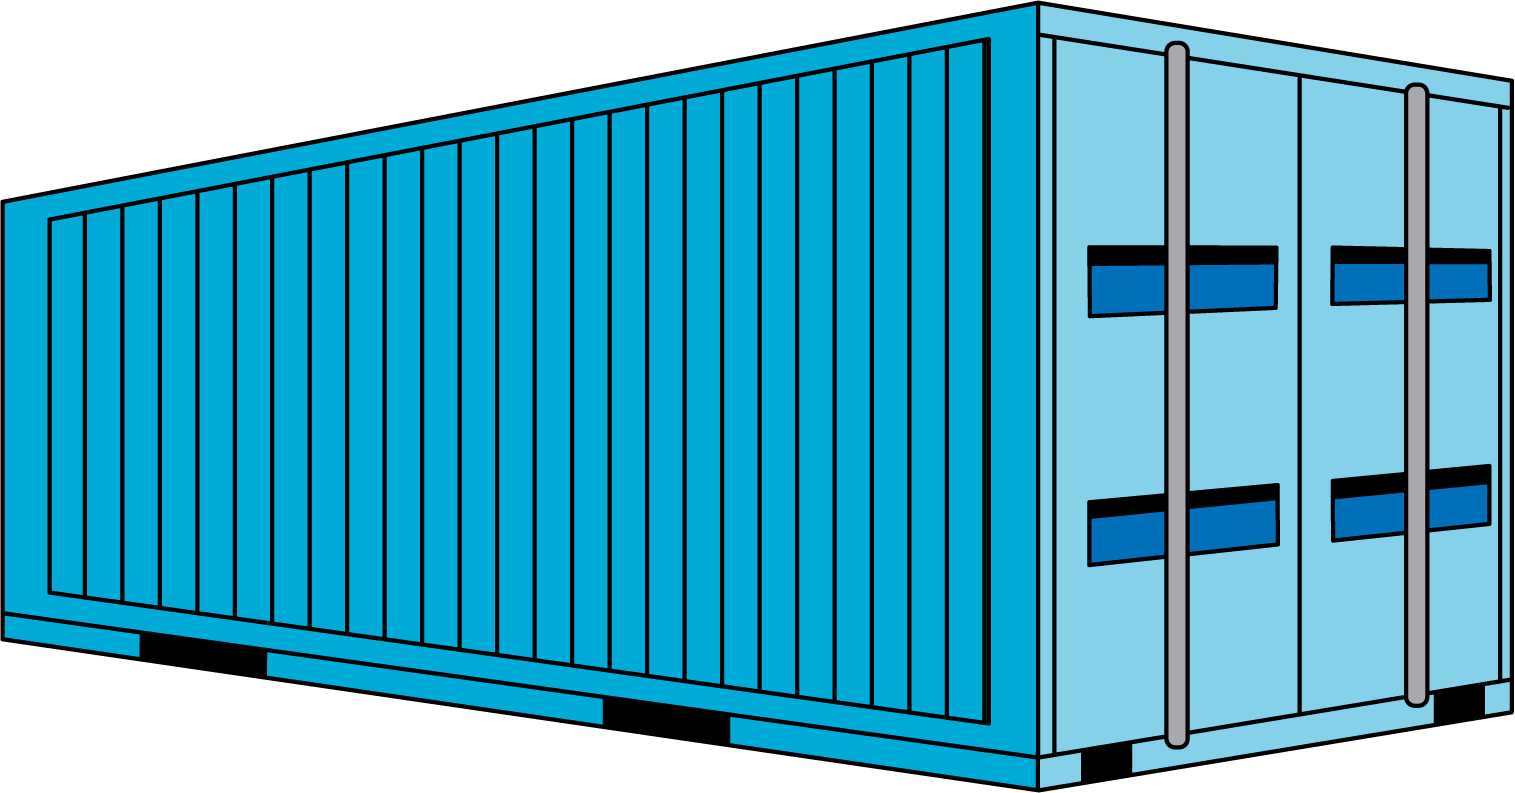 Shipping container in the shape of a Rectangular prism. 